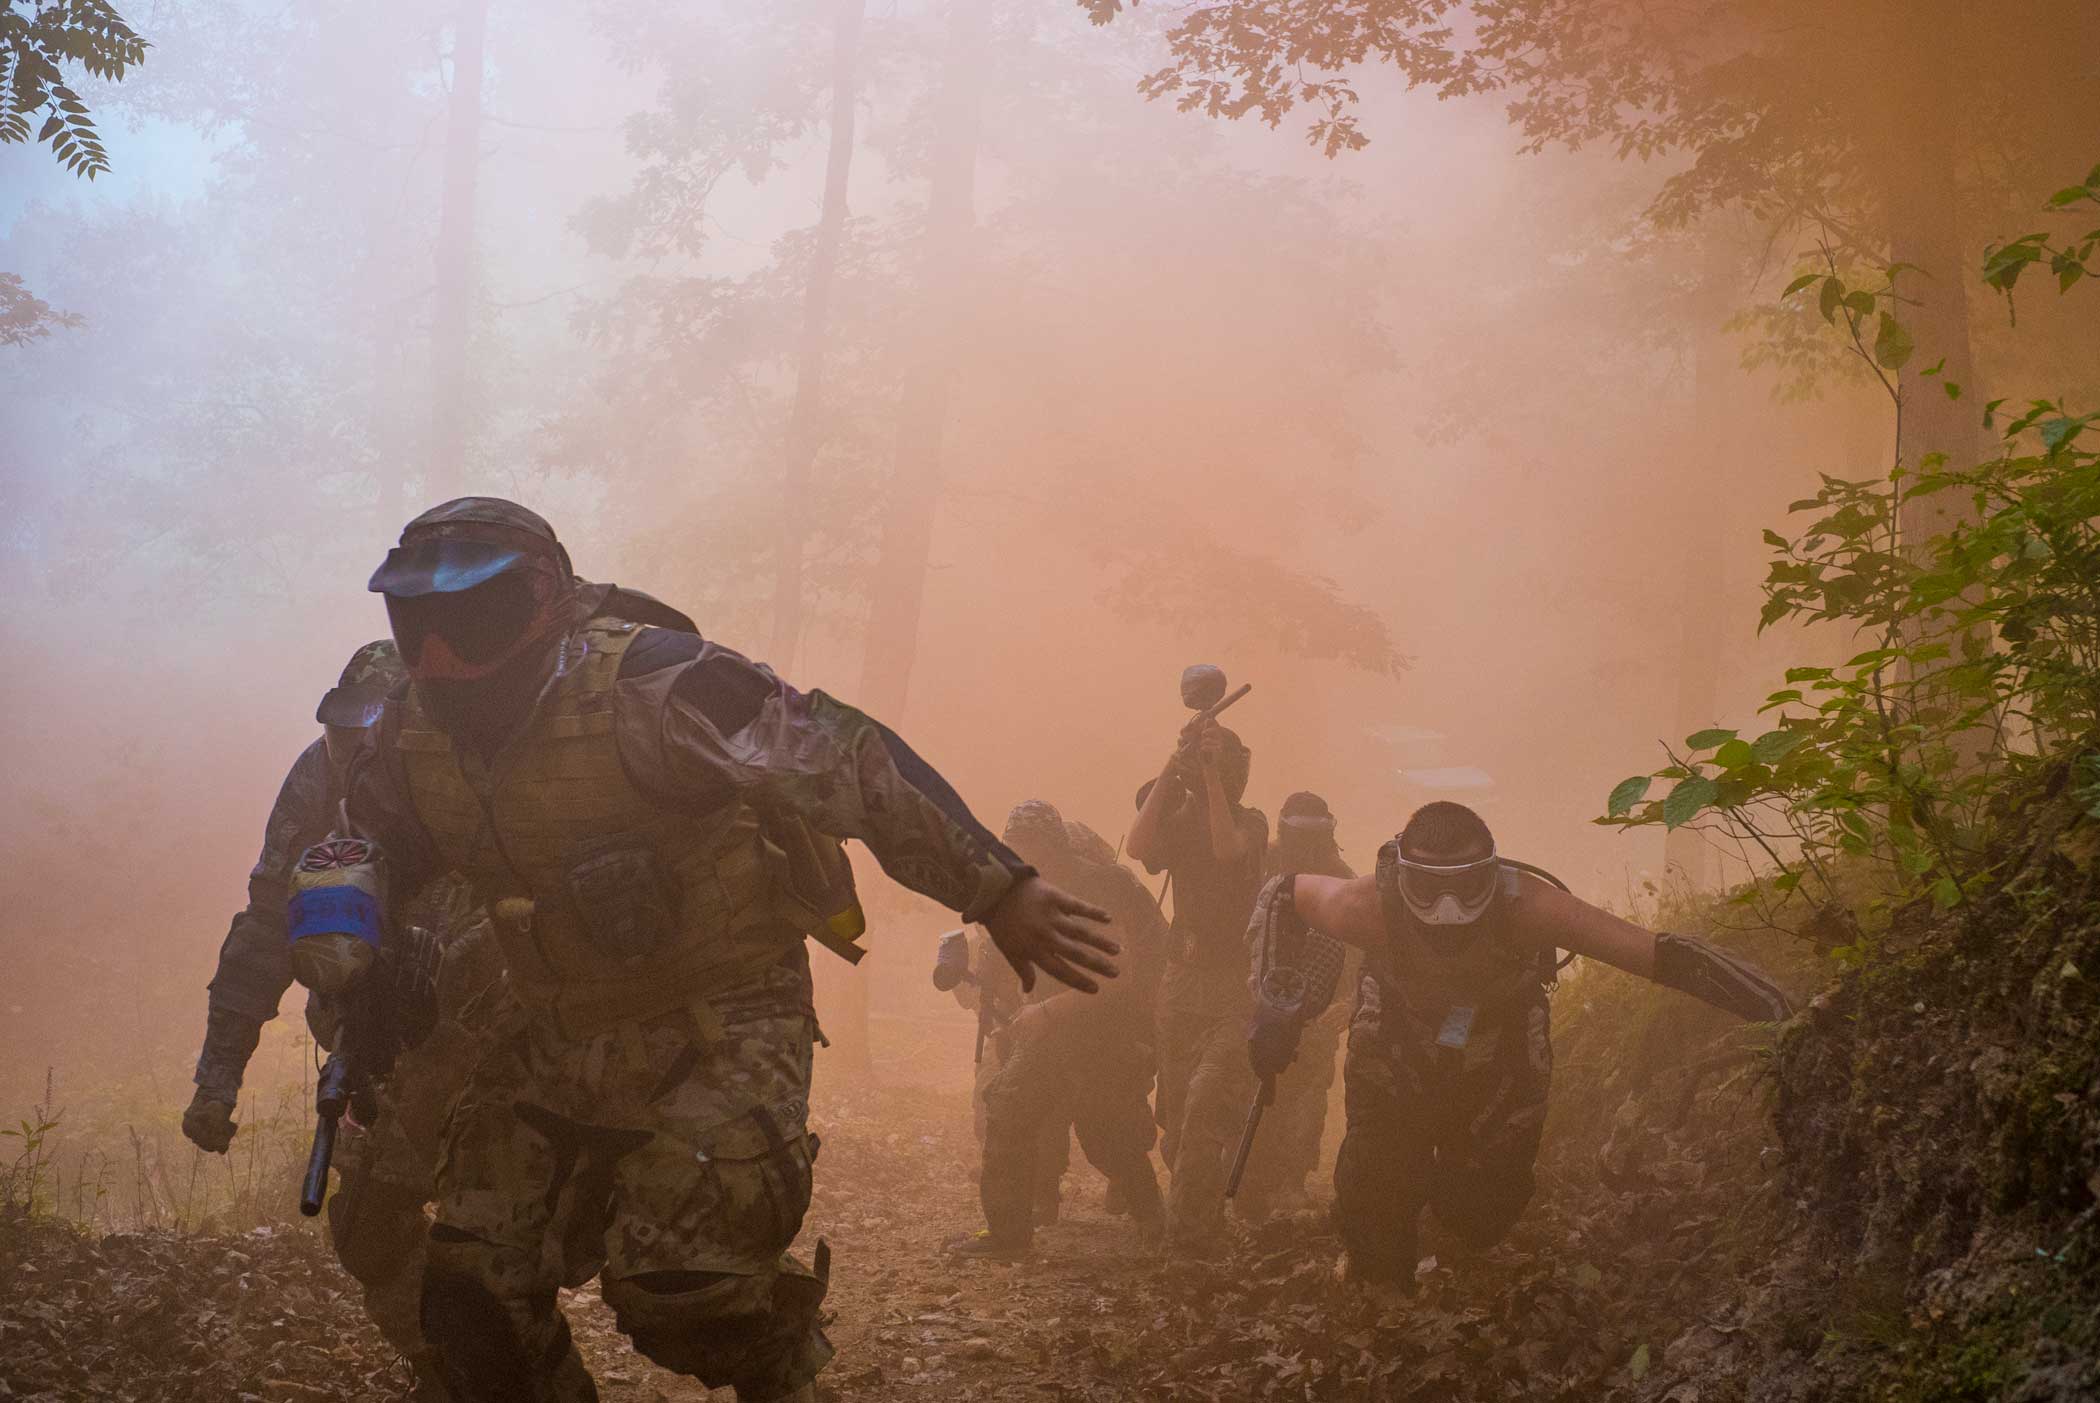 1st Infantry Division paintballers charge uphill during the assault on  Omaha Beach.